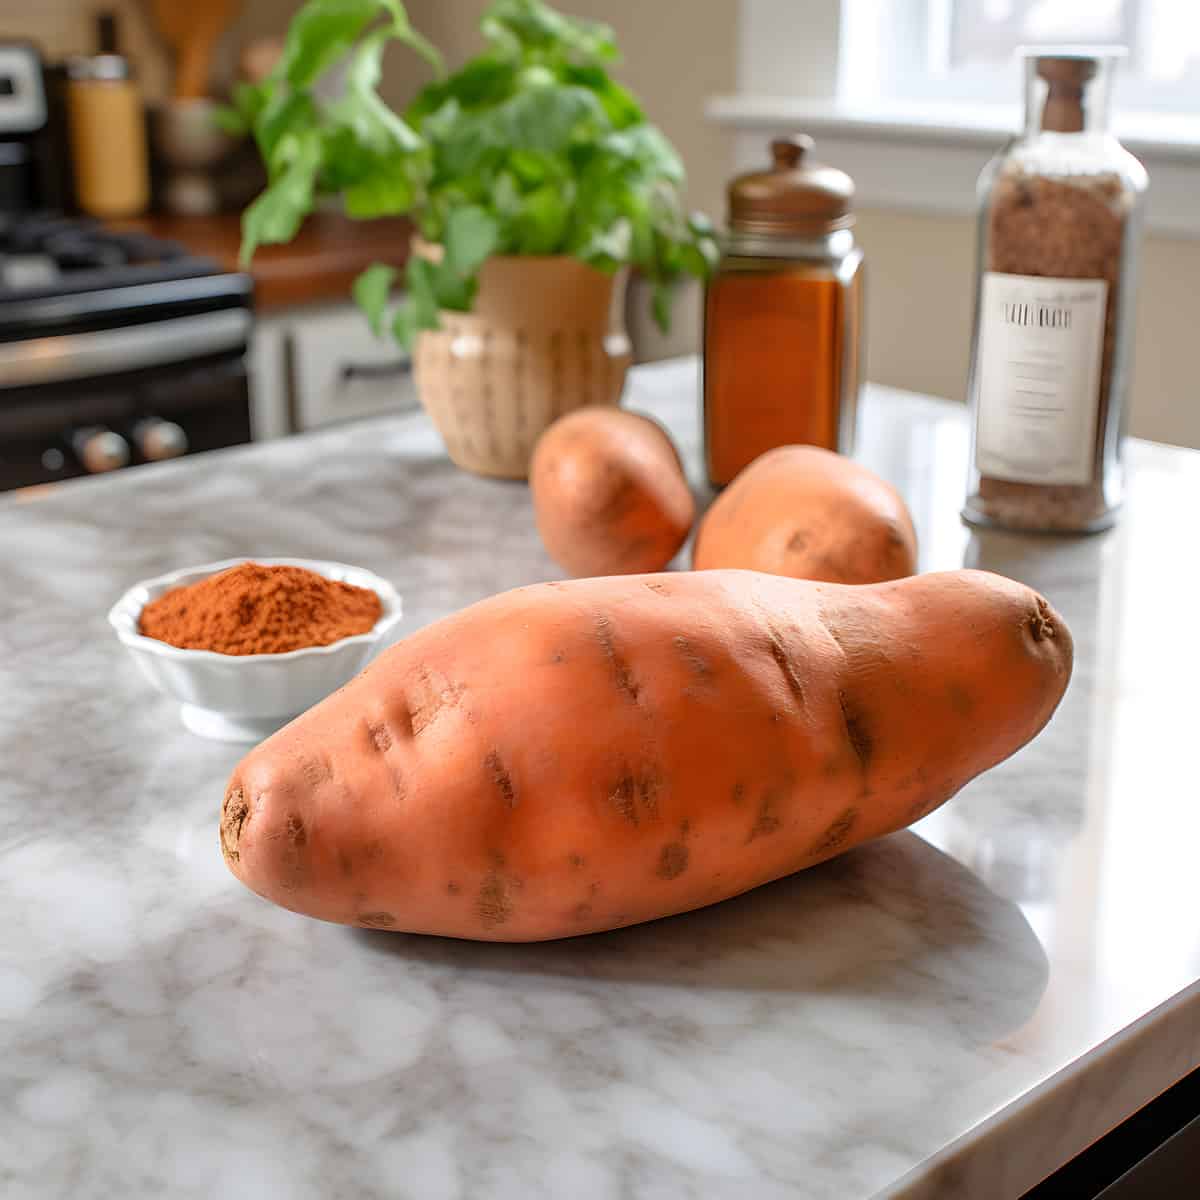 Topaz Sweet Potatoes on a kitchen counter